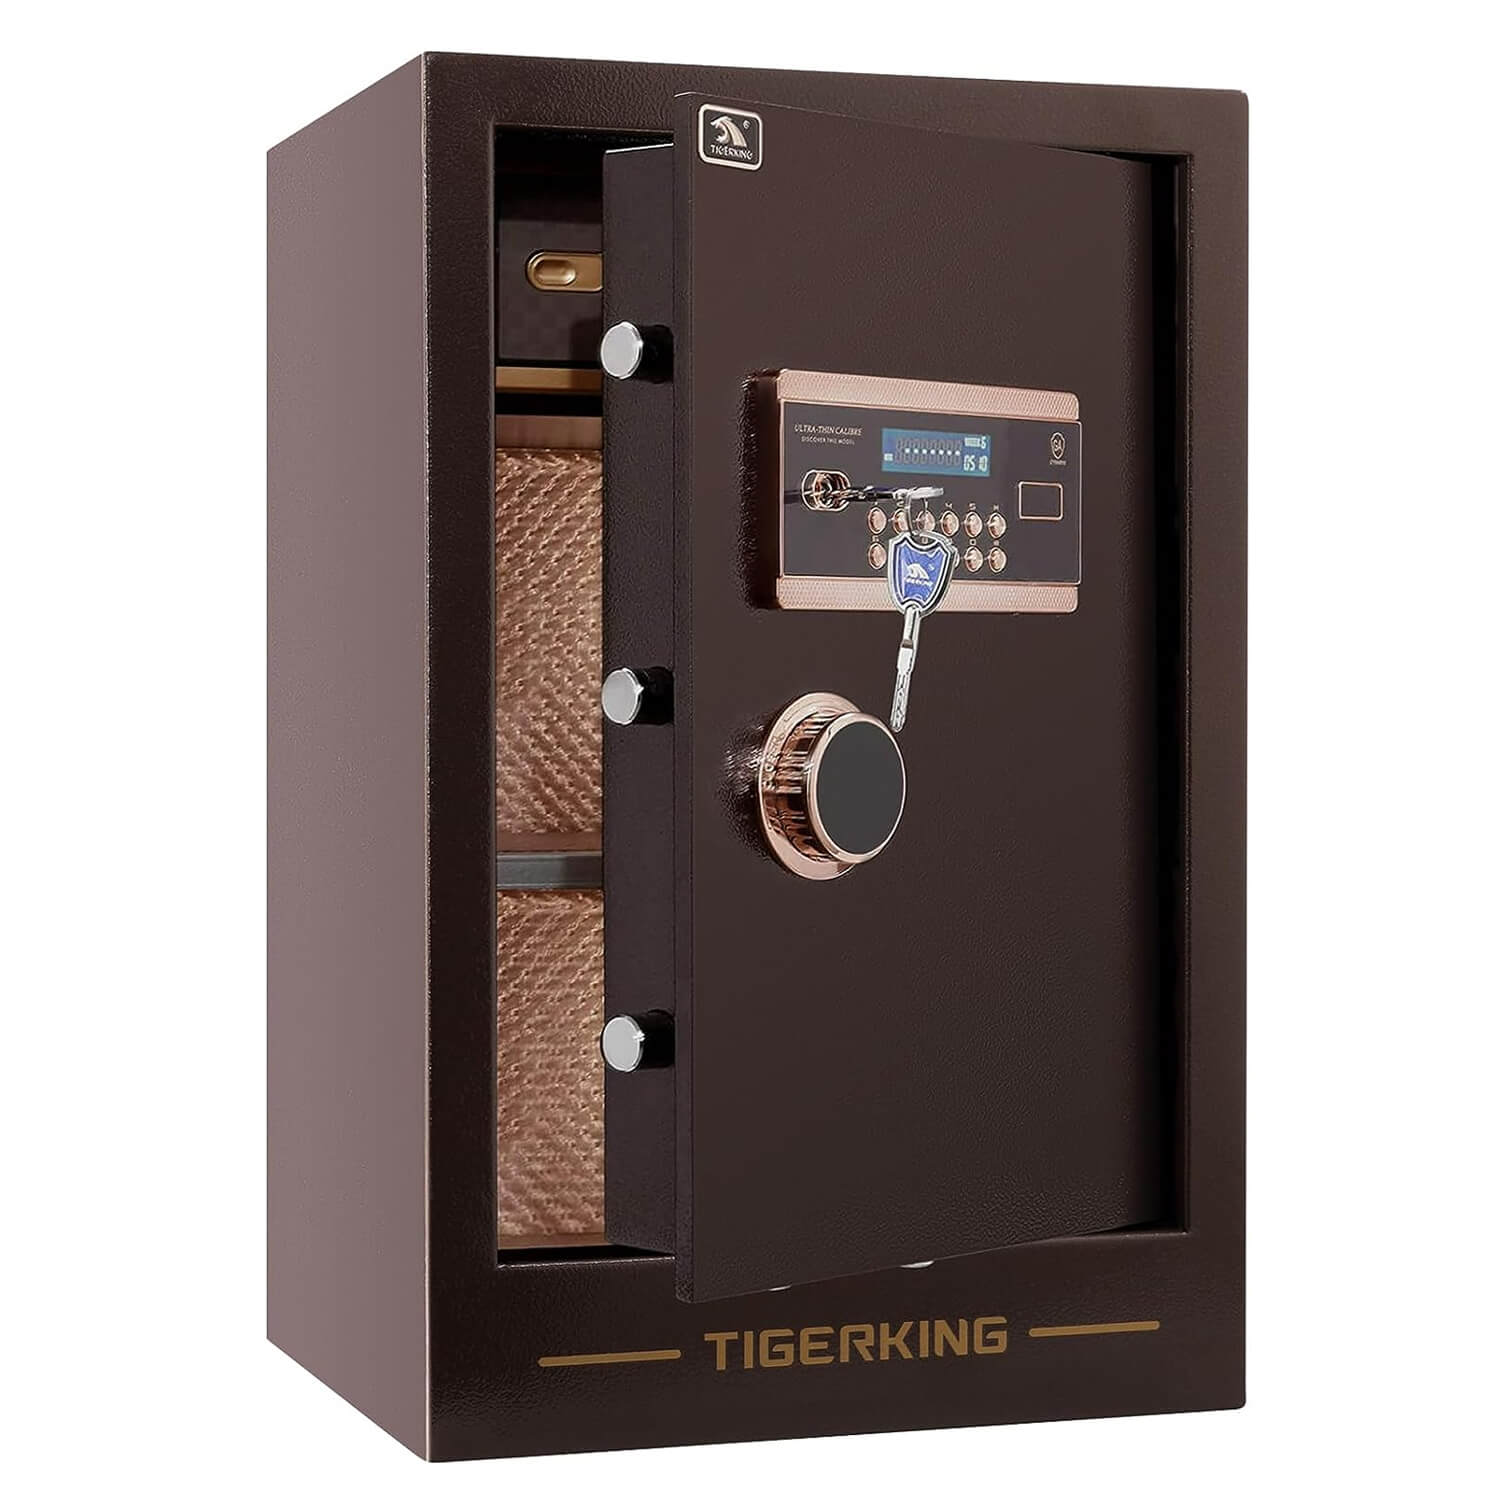 TIGERKING Burglary Digital Security Safe Box for Home Office Double Safety Key Lock and Password Safes 63XH-1 Gold